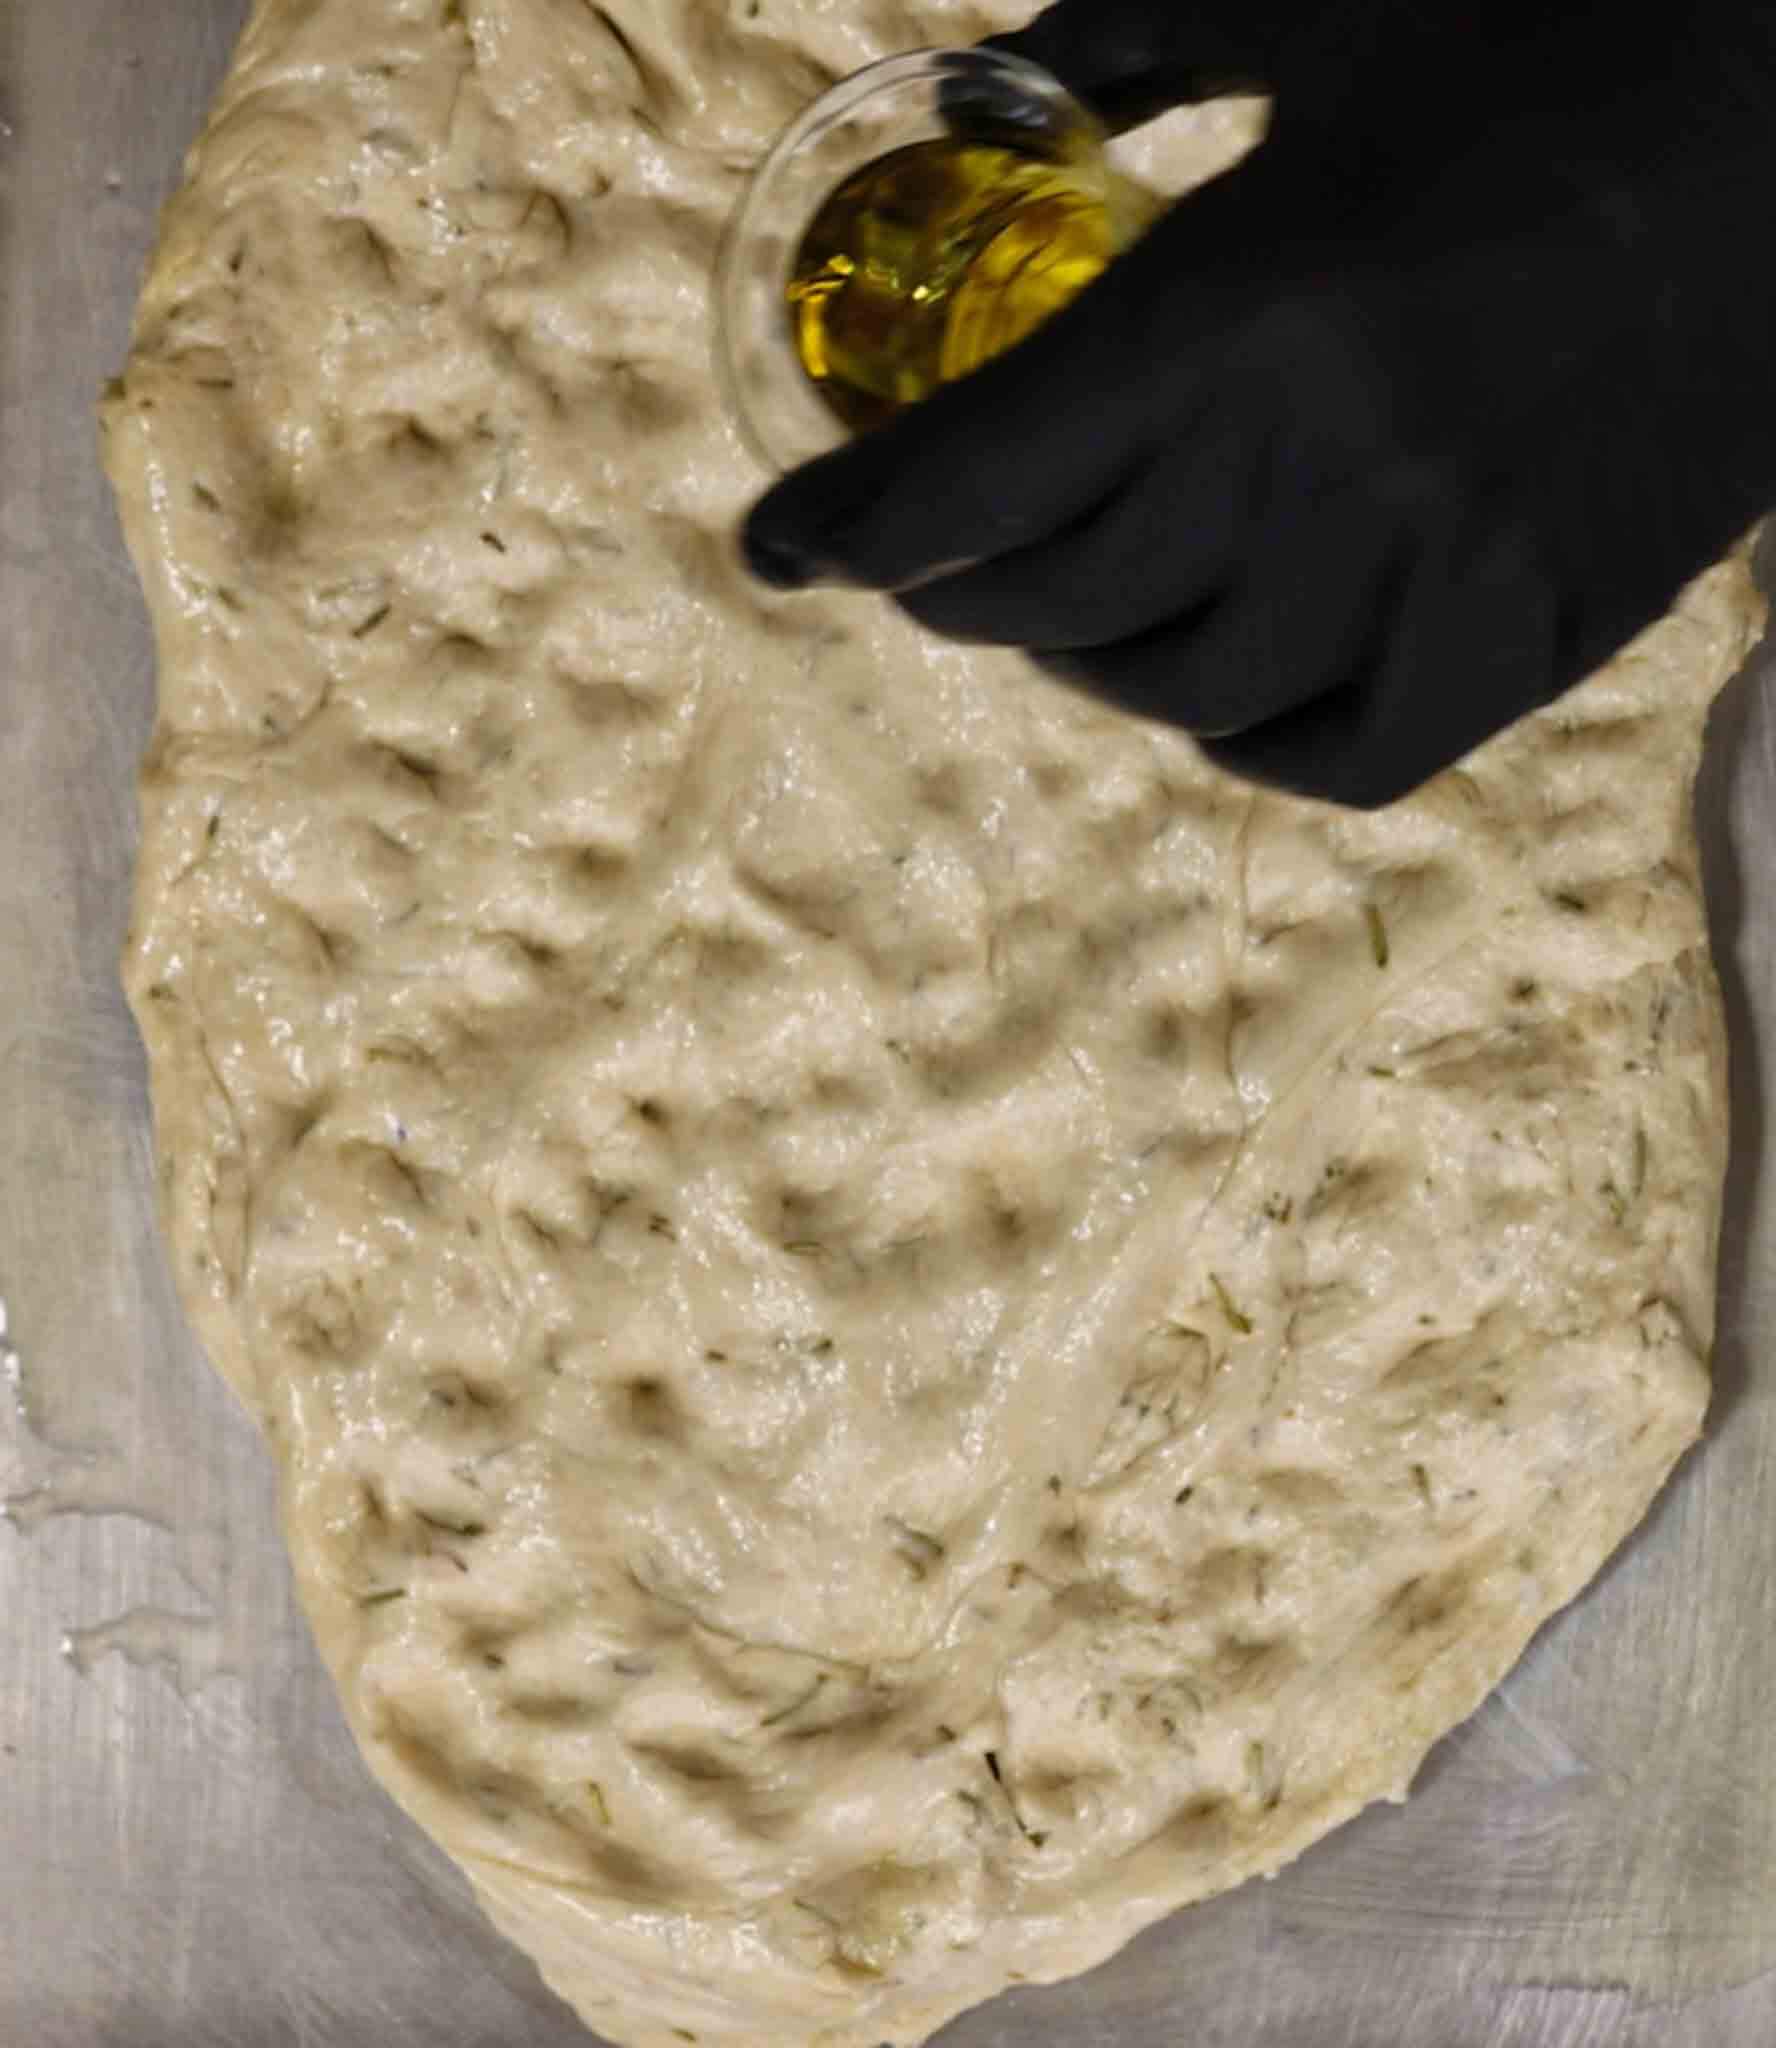 filling the focaccia dough with olive oil